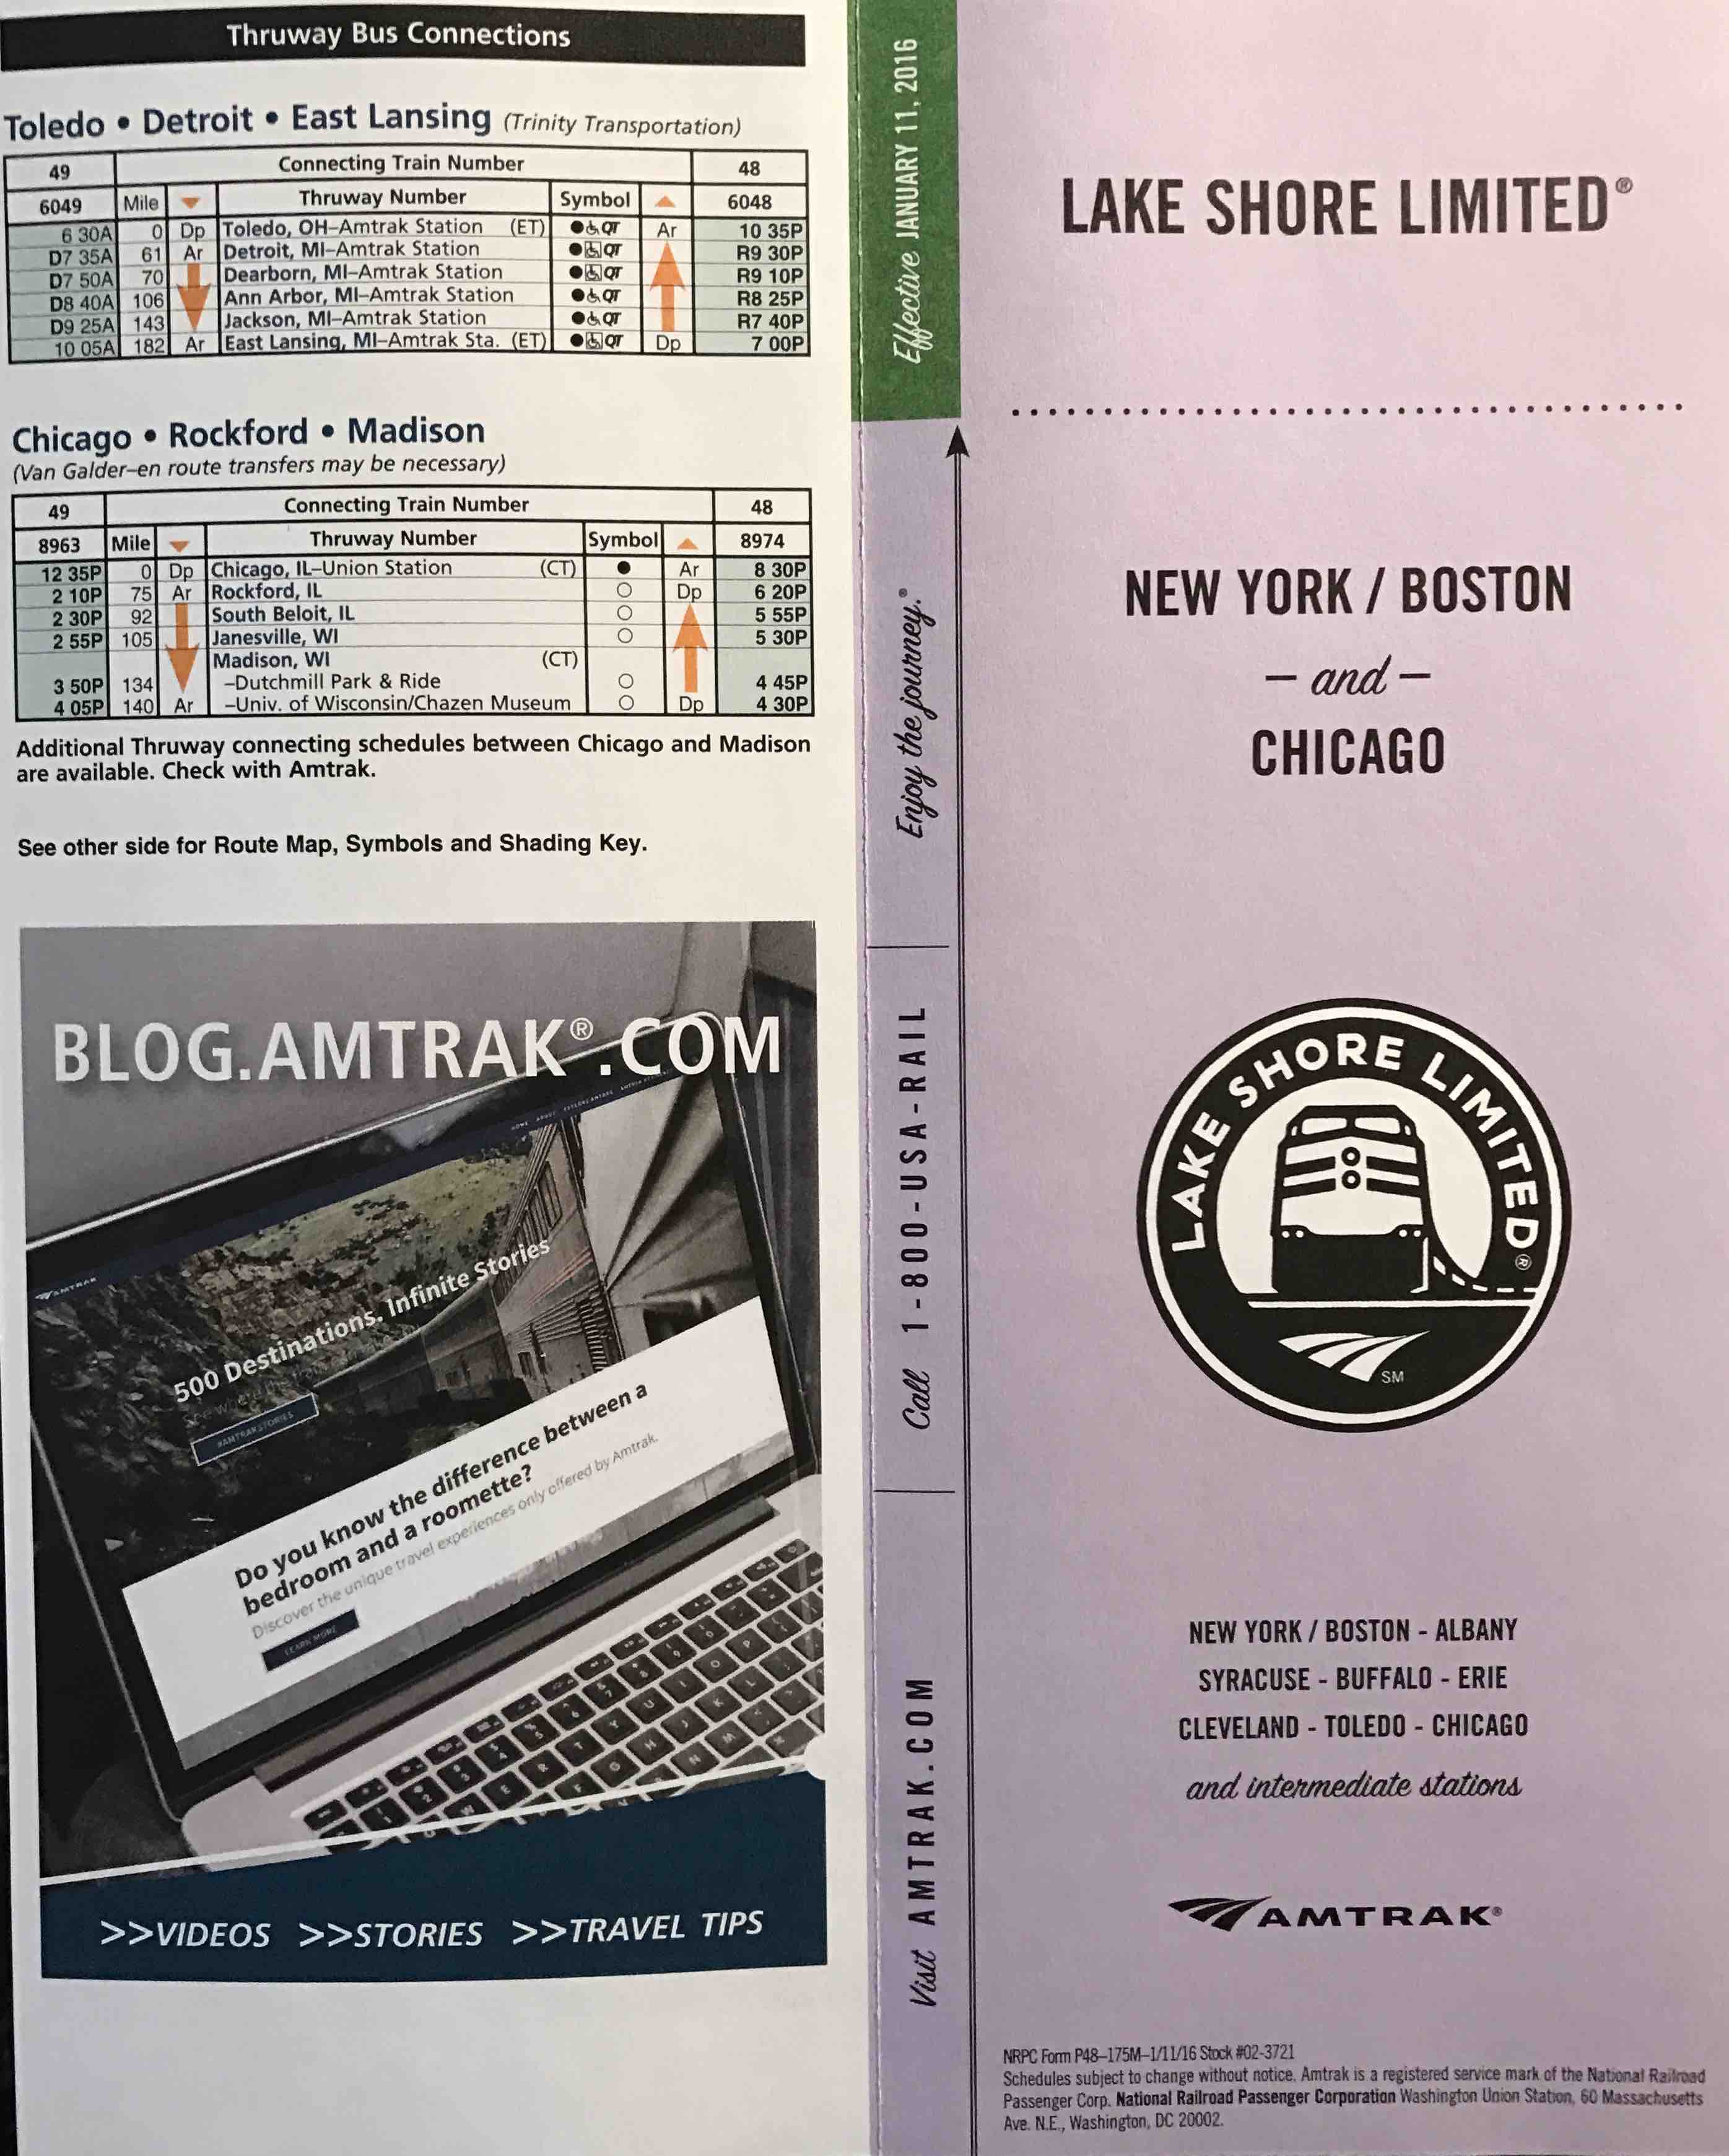 Amtrak lake shore limited schedule 1